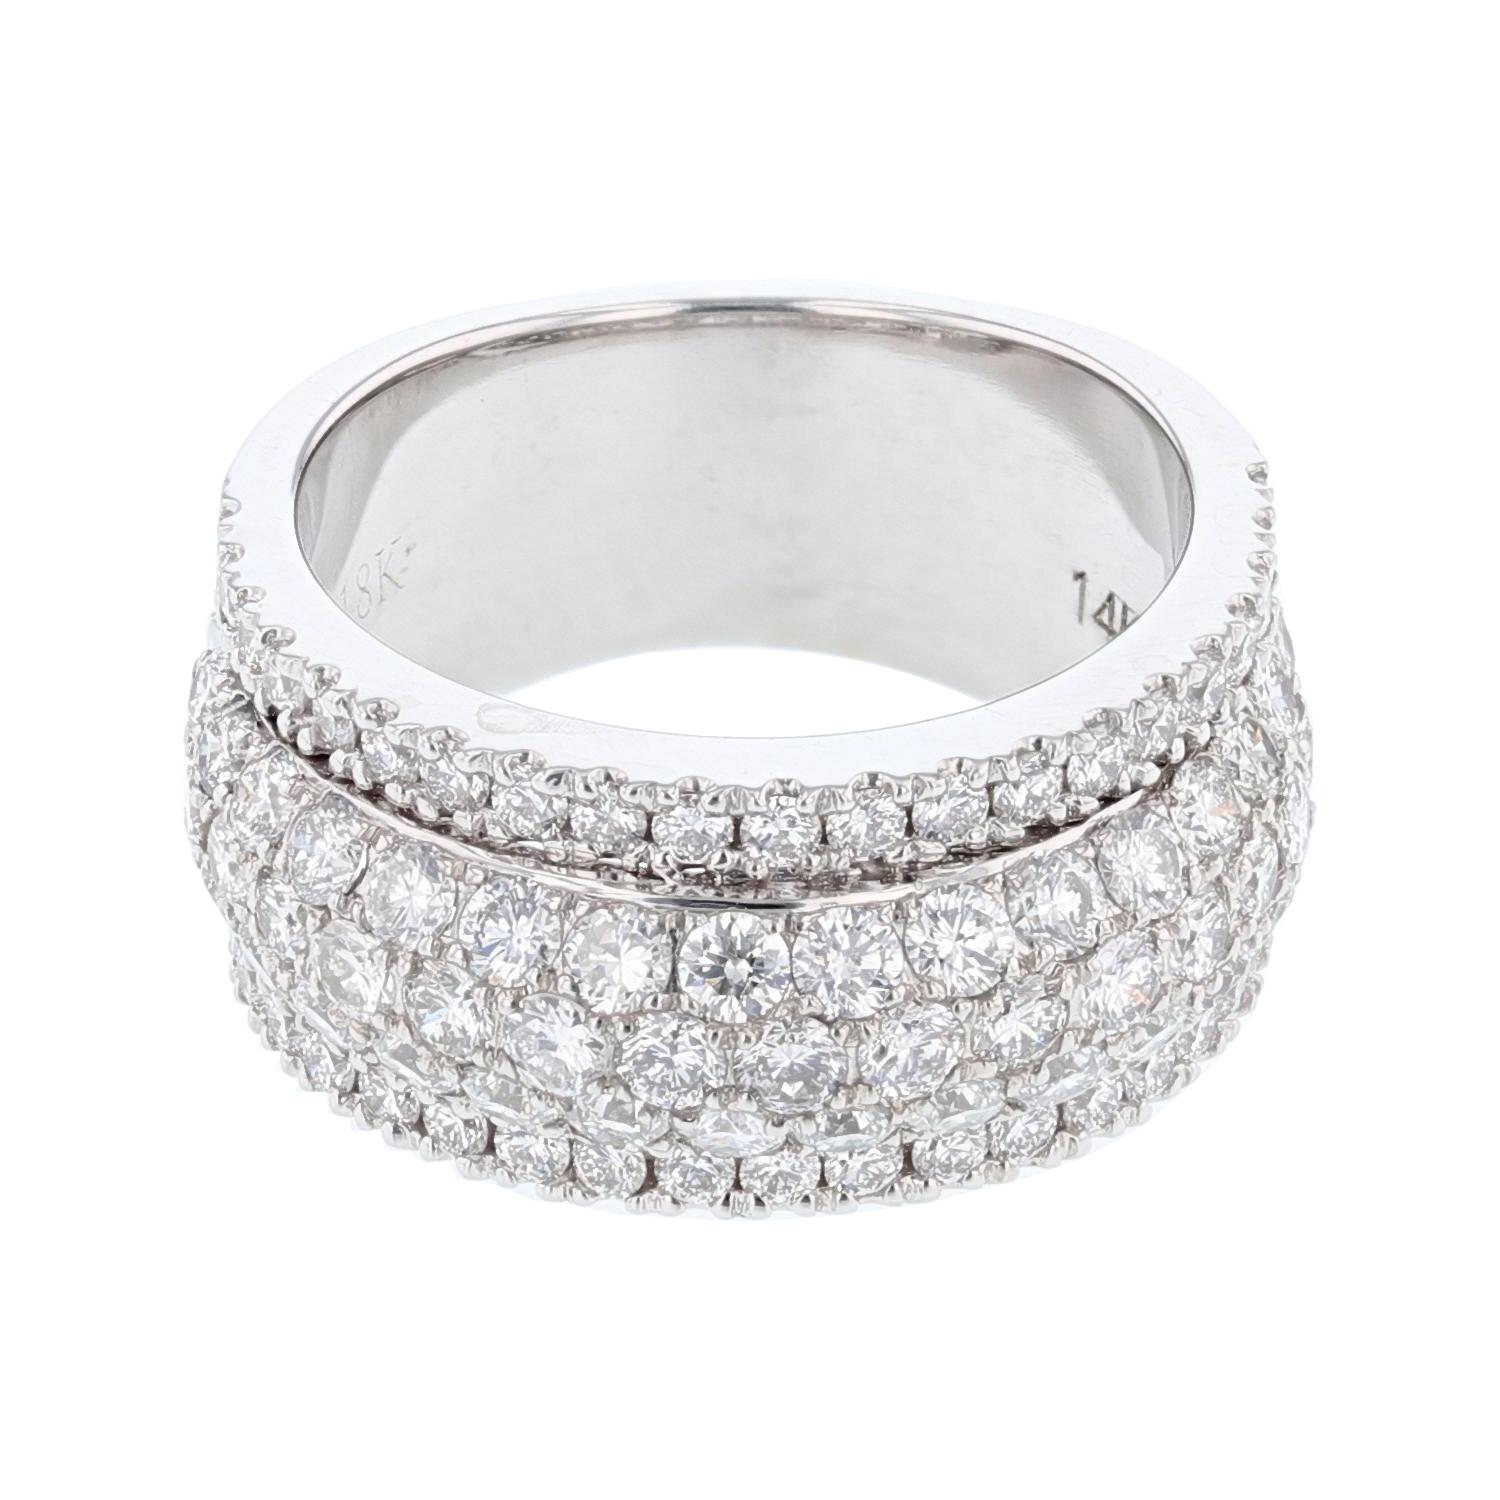 The ring is made in 14k white gold and features 92 round cut diamonds, prong set weighing 2.61cts with a color grade (H) and clarity grade (SI1). 